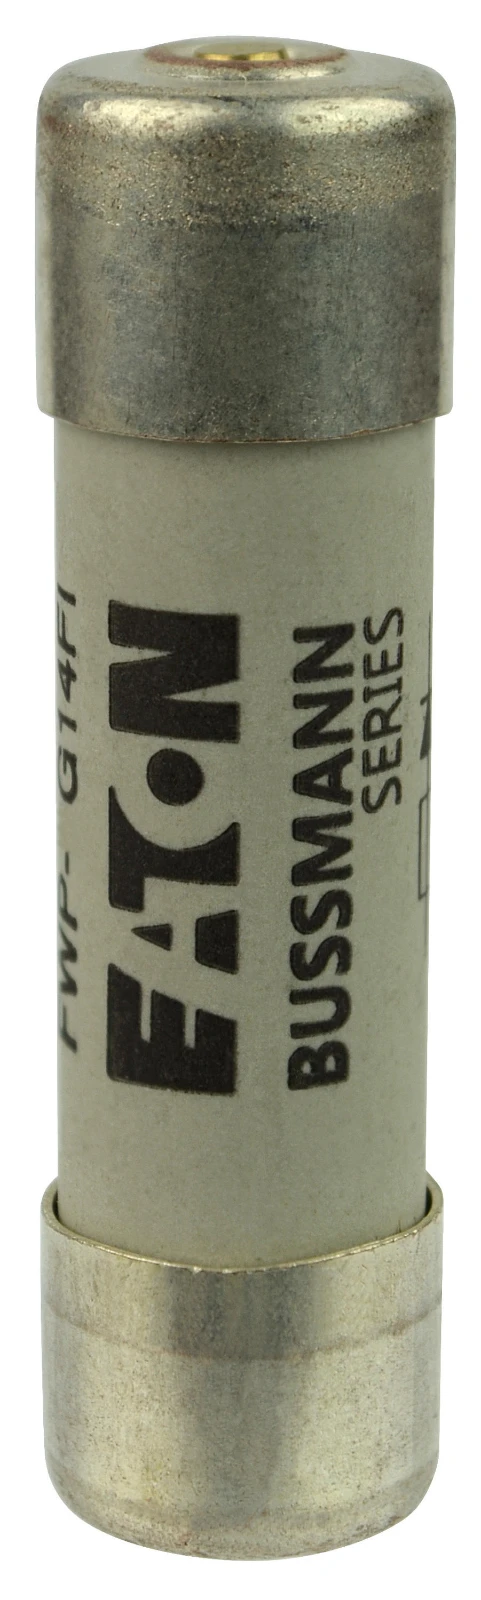 2545523 - Eaton Fuse 25A 690VAC gR 14x51 with Ind